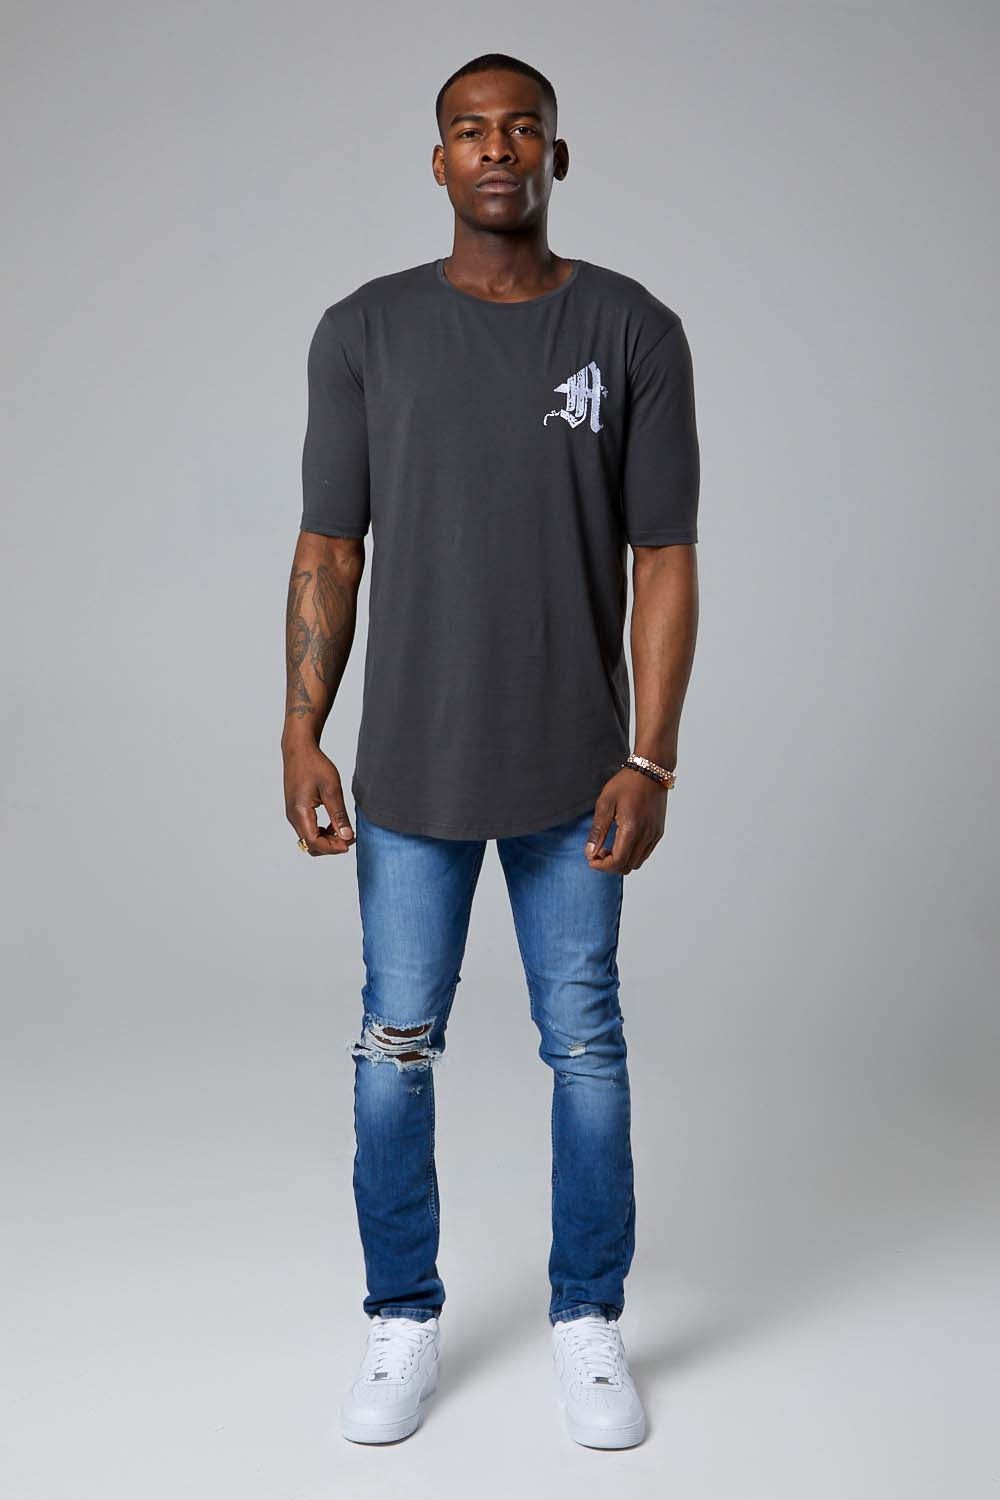 Ashes Varsity S/S tee-Charcoal